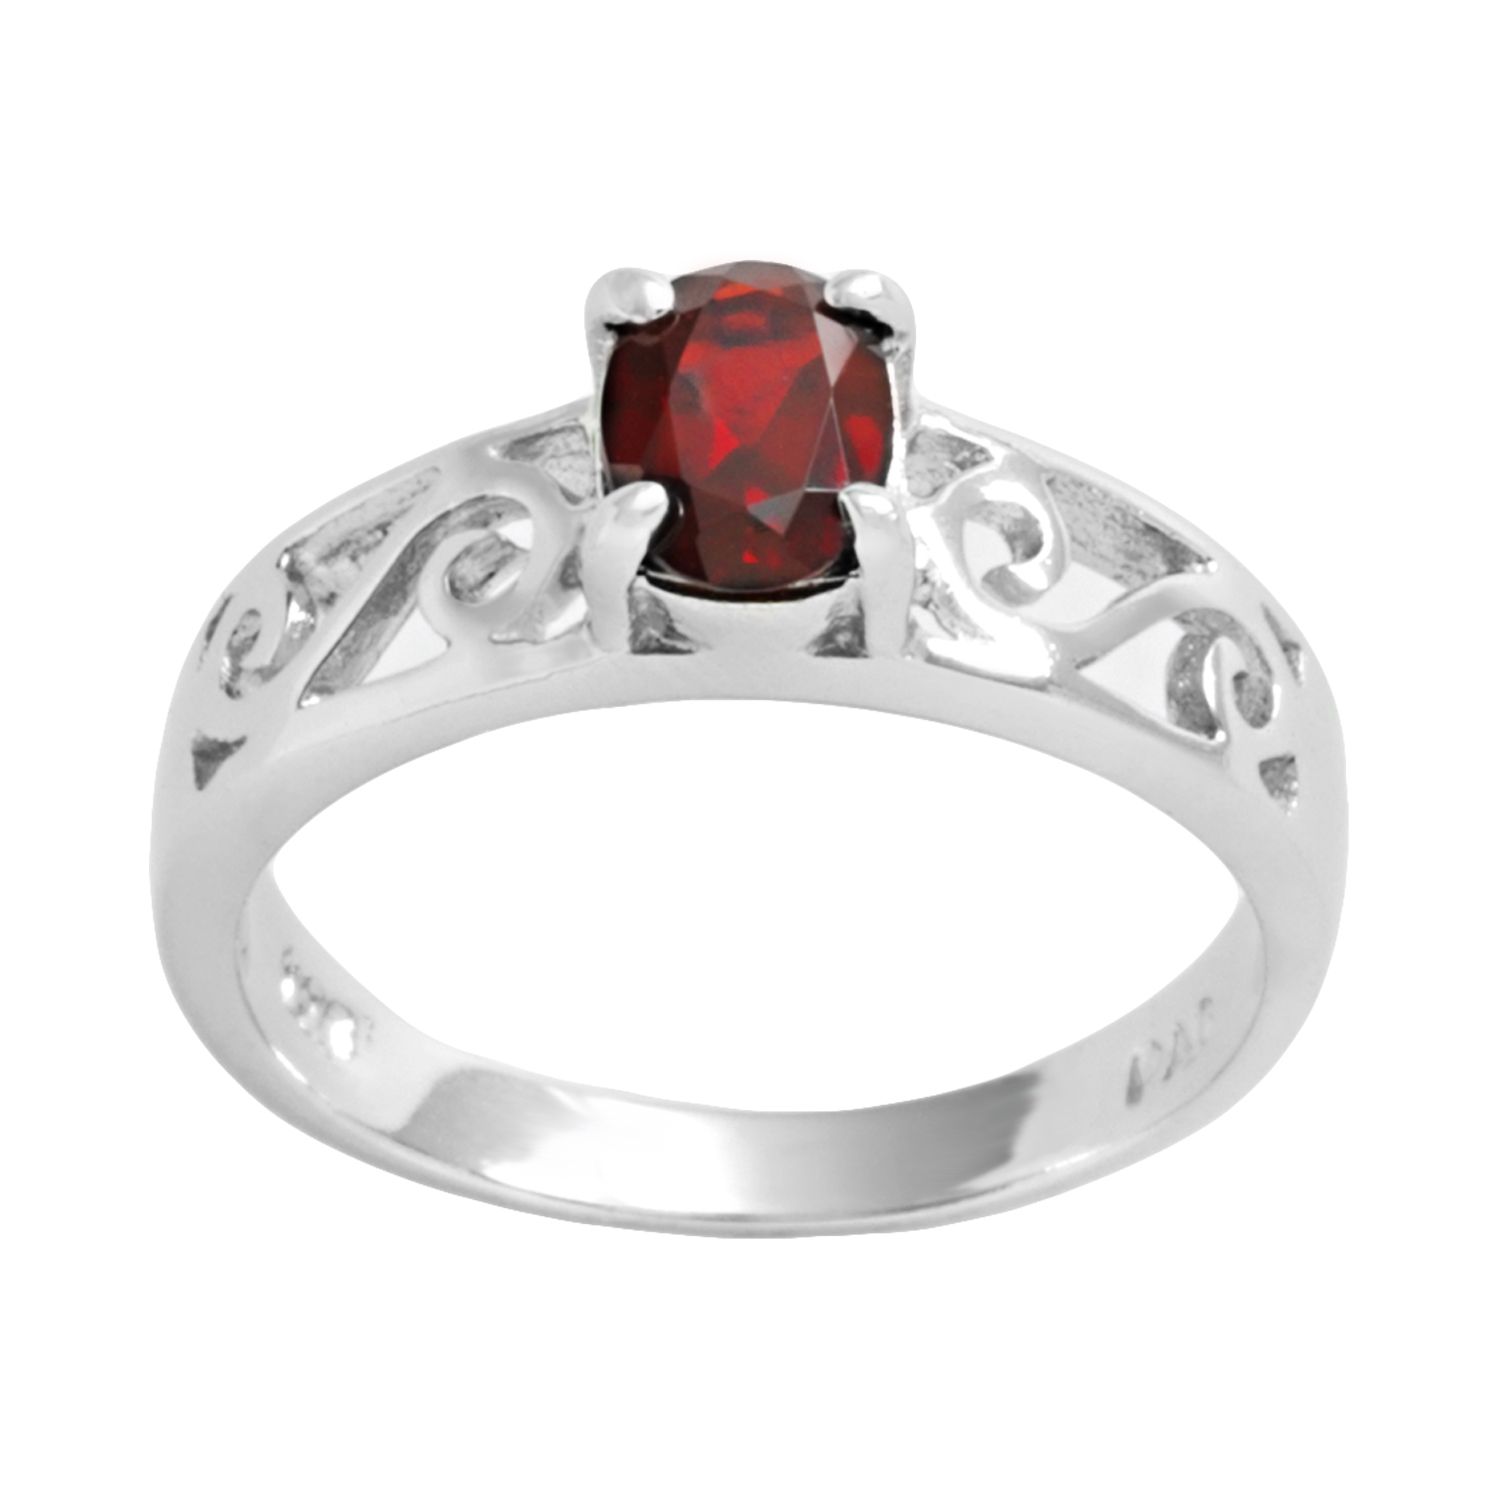 Details about   United States Marines Military Stainless Steel Unisex Red Garnet Ring Size 11 